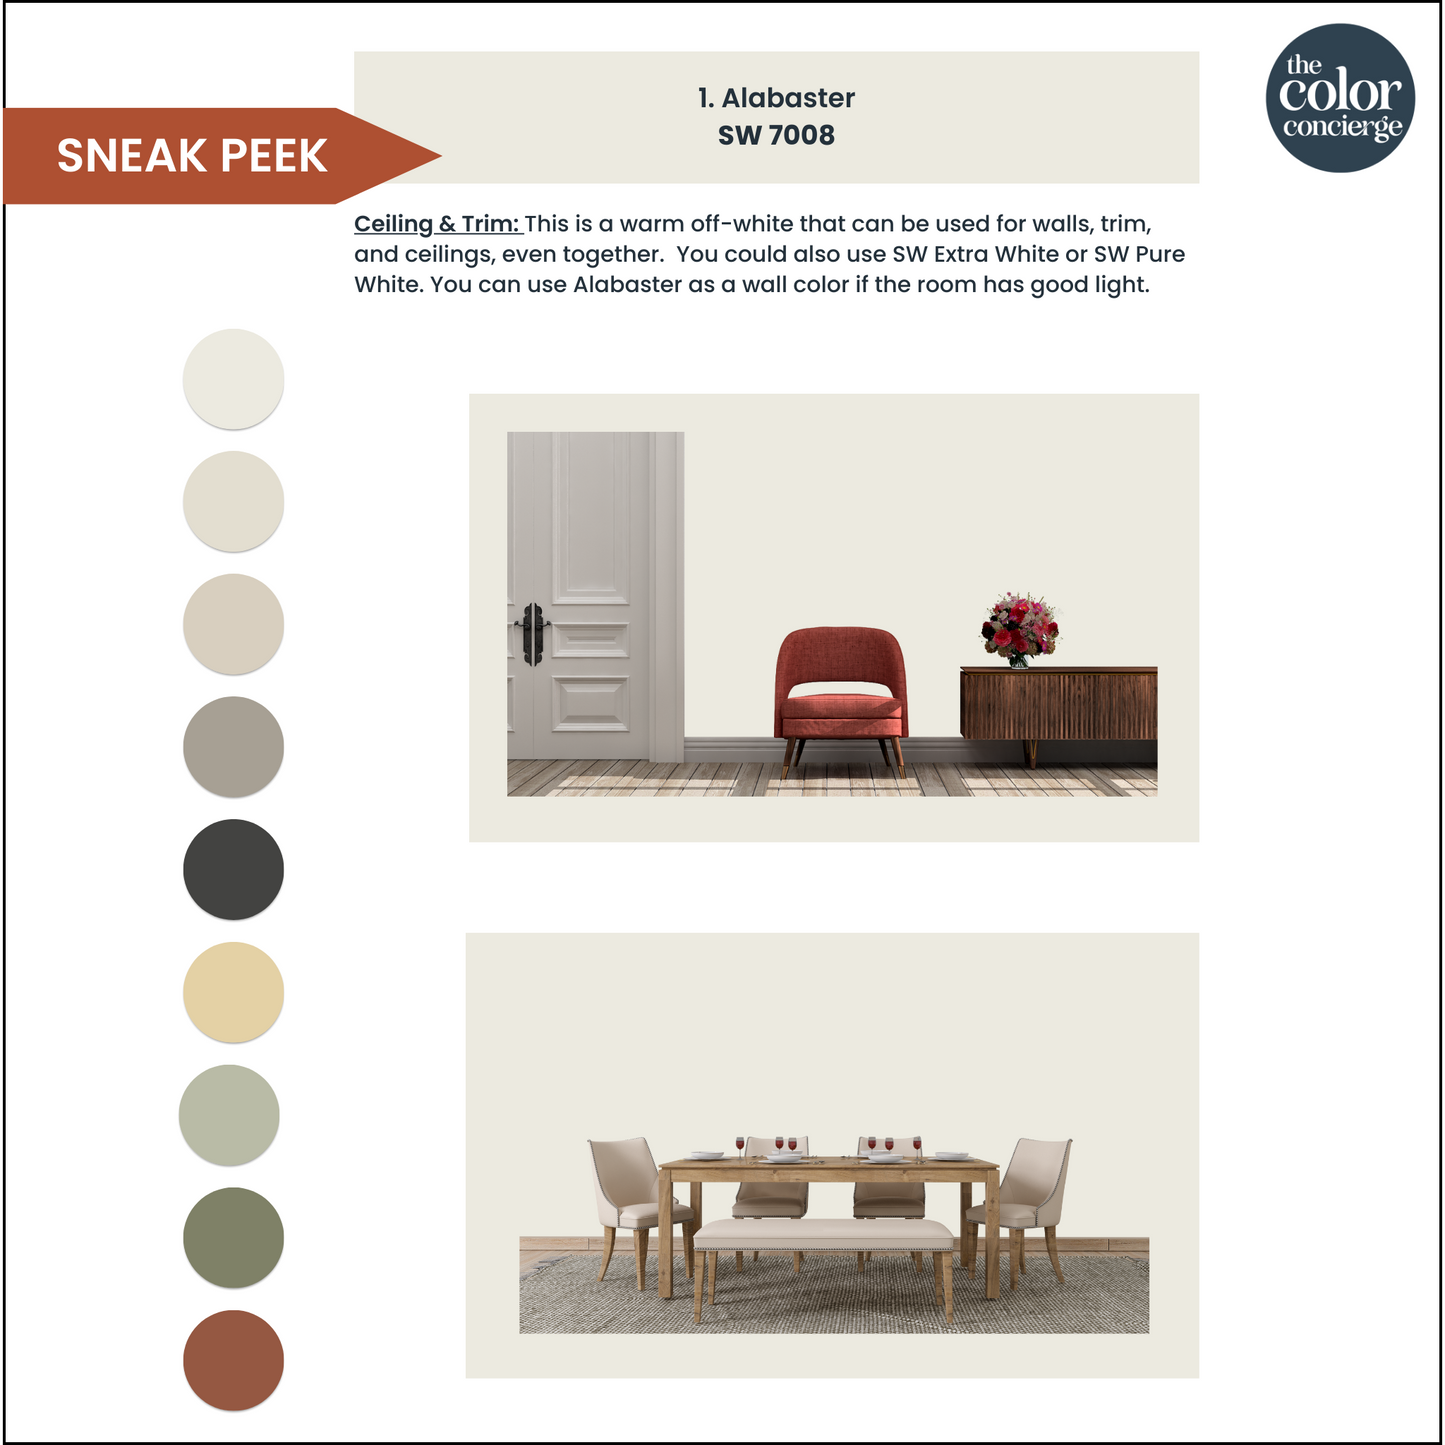 A page showing how to use a Sherwin-Williams Alabaster color palette in your home